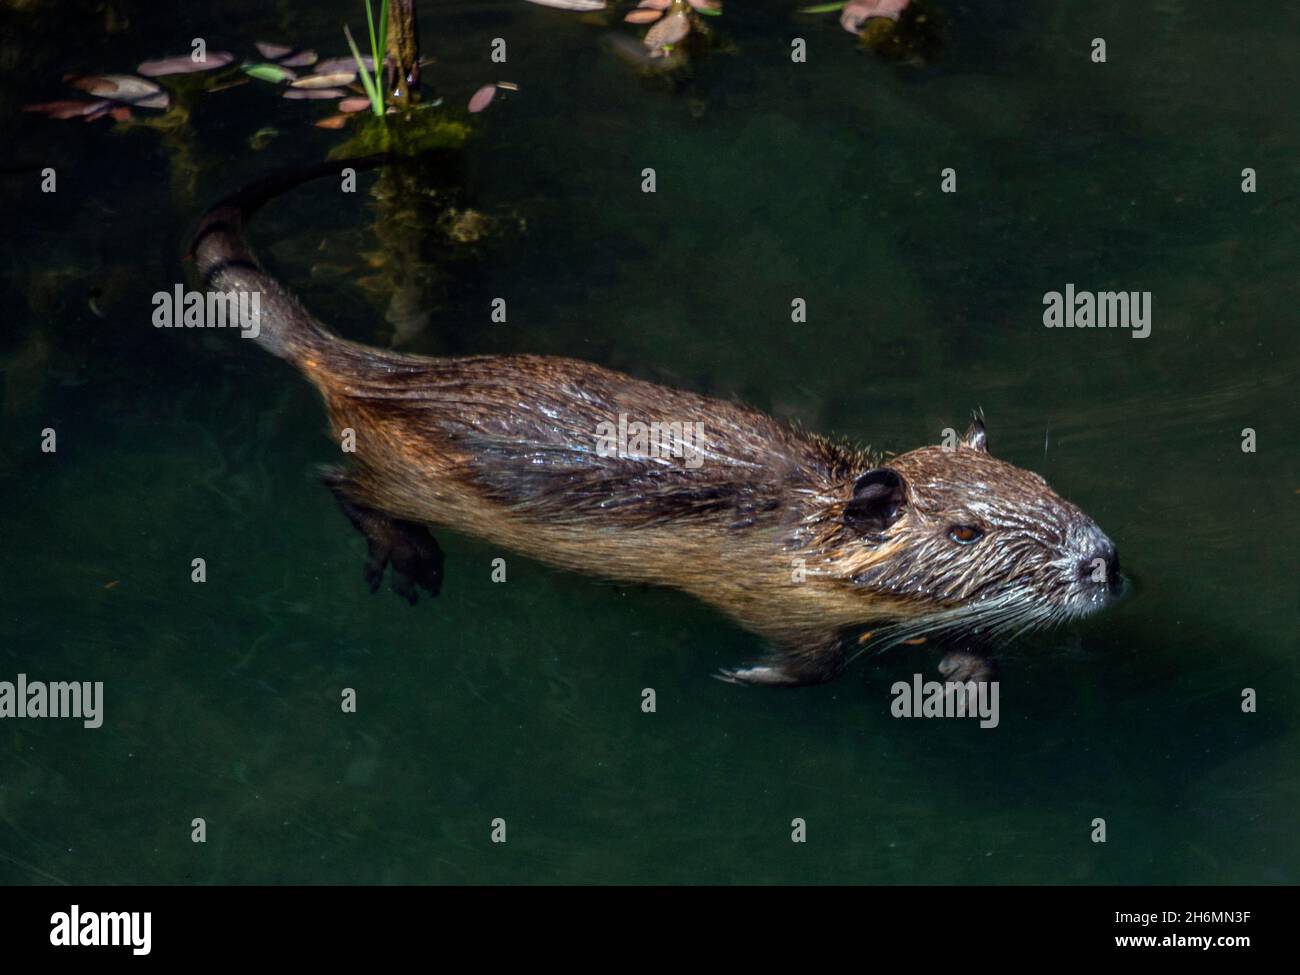 A close up shot of a French Coypu, or Ragondin (Myocastor coypus) swimming in a river. Stock Photo